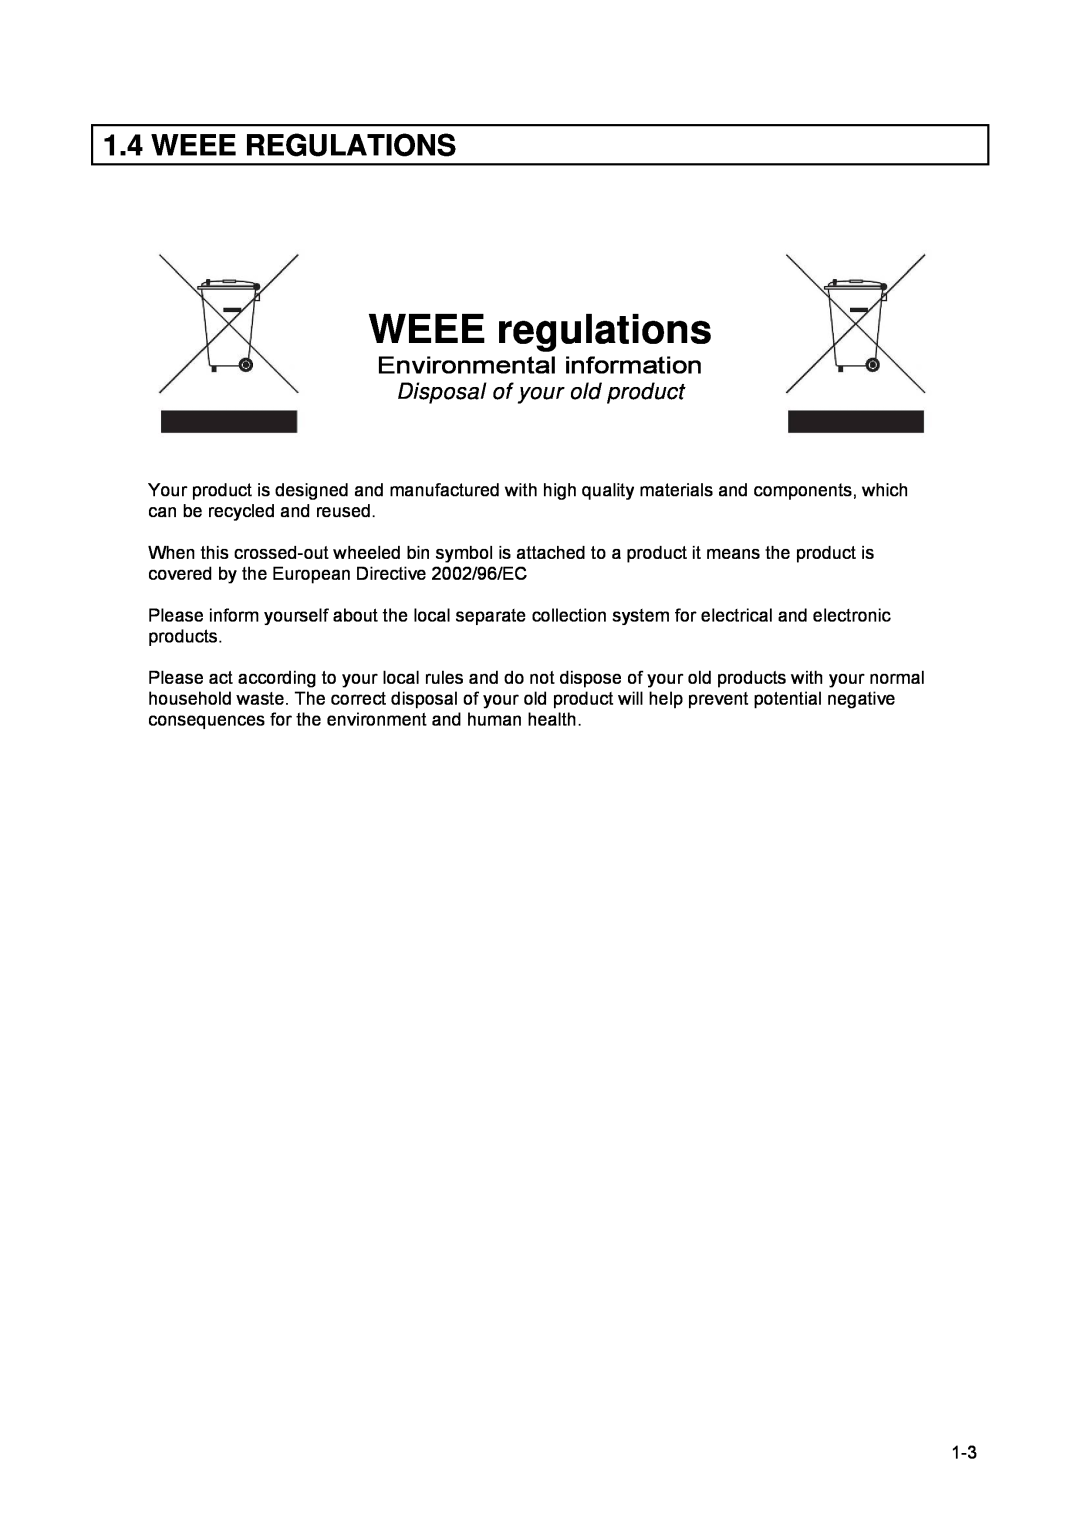 Xerox 83xx, 82xx manual Weee Regulations, Disposal of your old product, WEEE regulations, Environmental information 